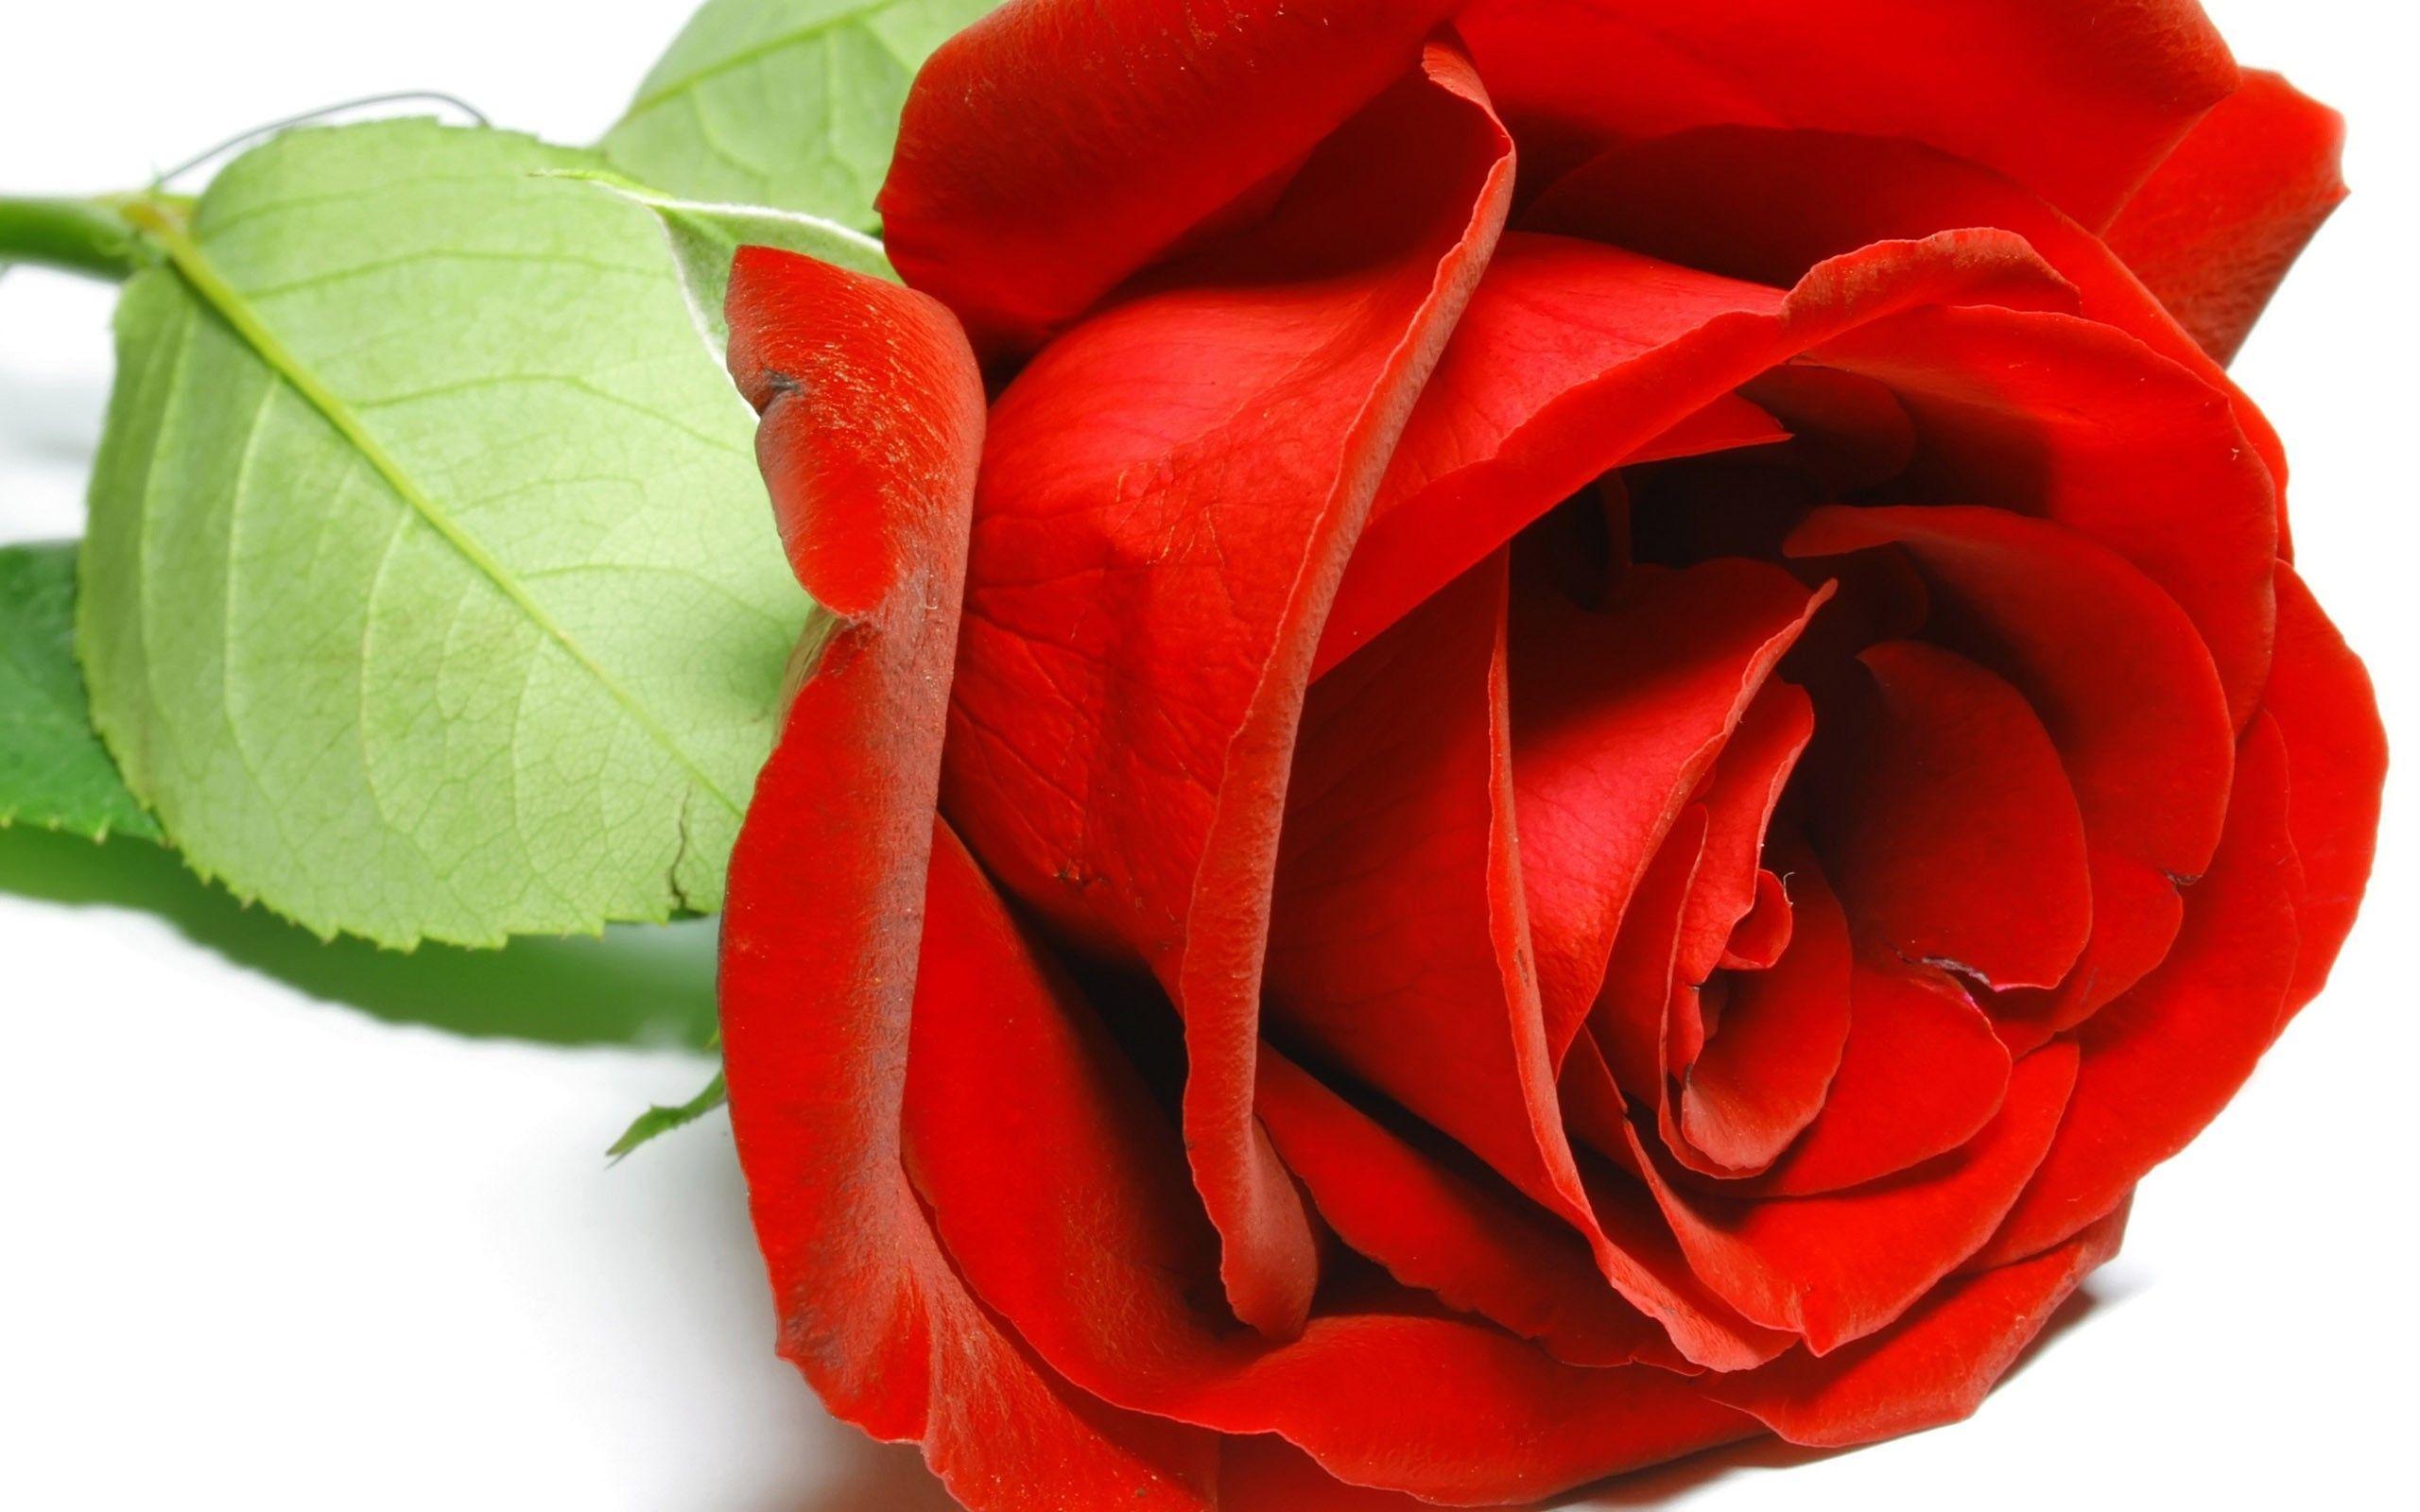 image For > Single Red Rose Flowers Image